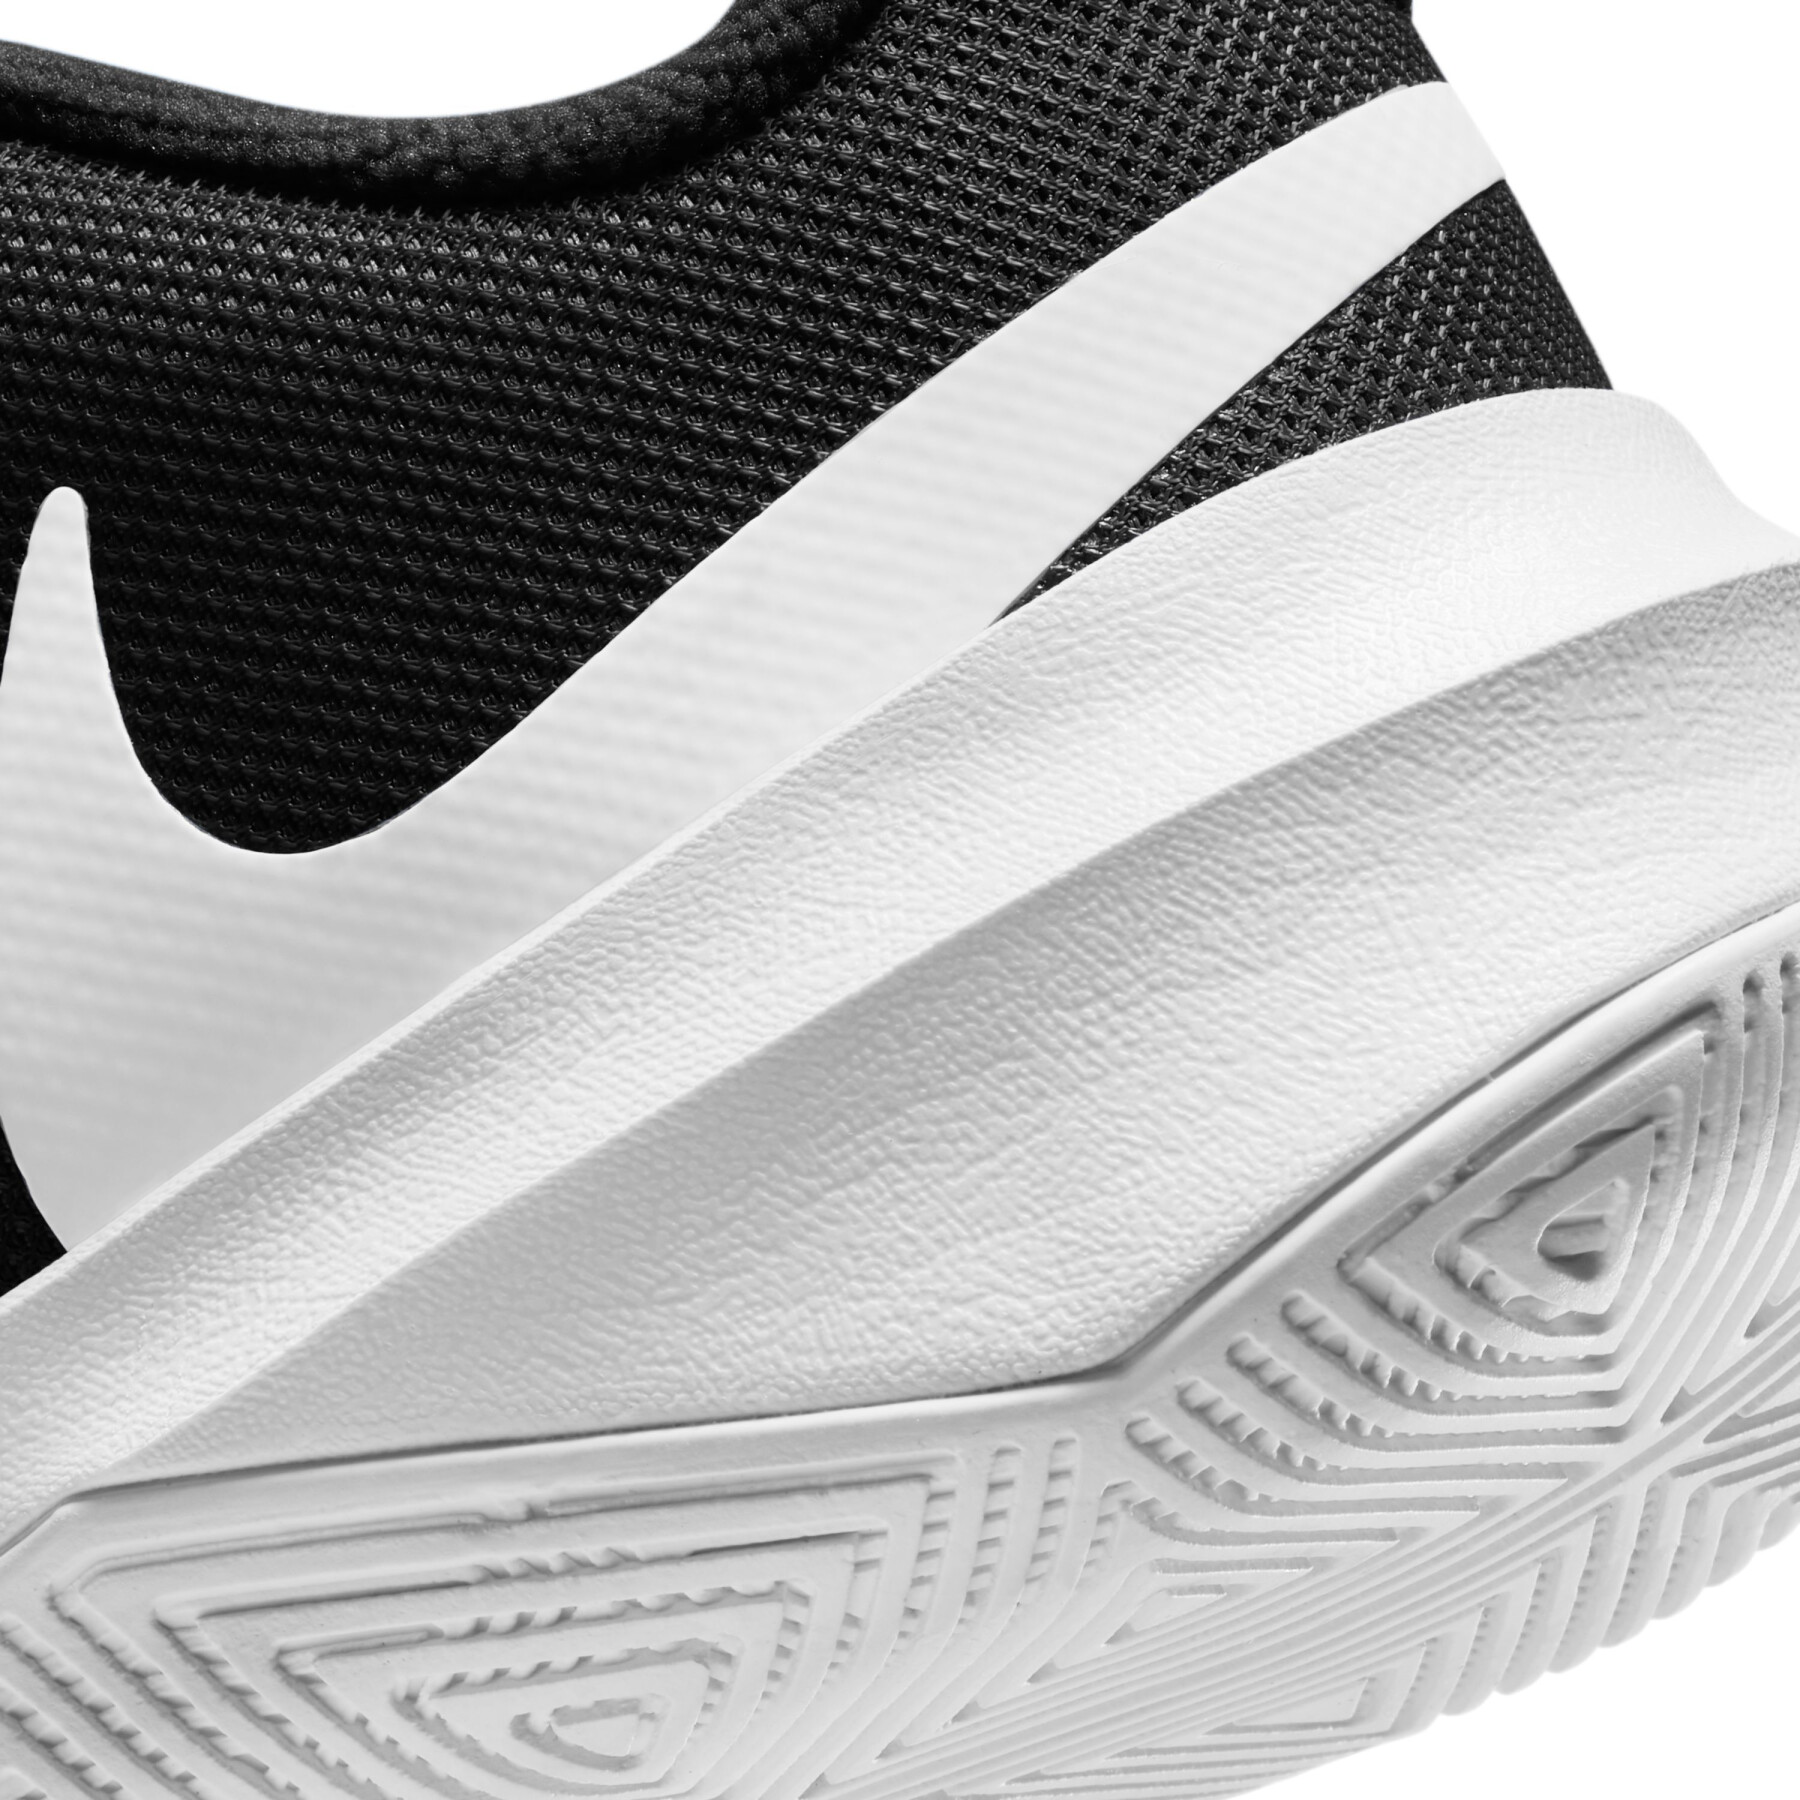 Chaussures femme Nike Hyperspeed Court